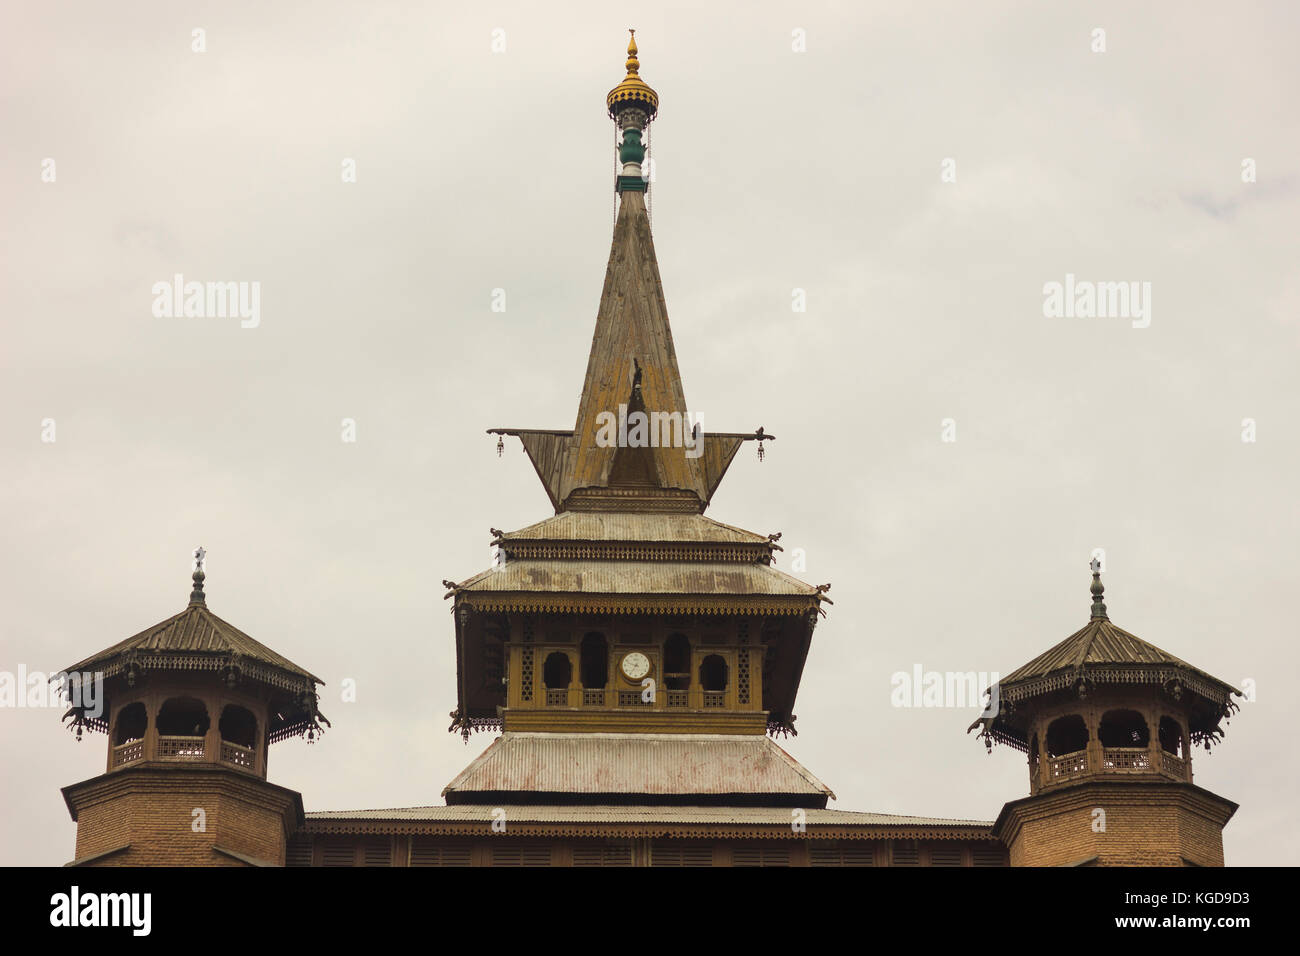 Jamia Masjid is a mosque in Srinagar, Jammu & Kashmir, India. The Jamia Masjid of Srinagar is situated at Nowhatta in the middle of the Old City. Stock Photo